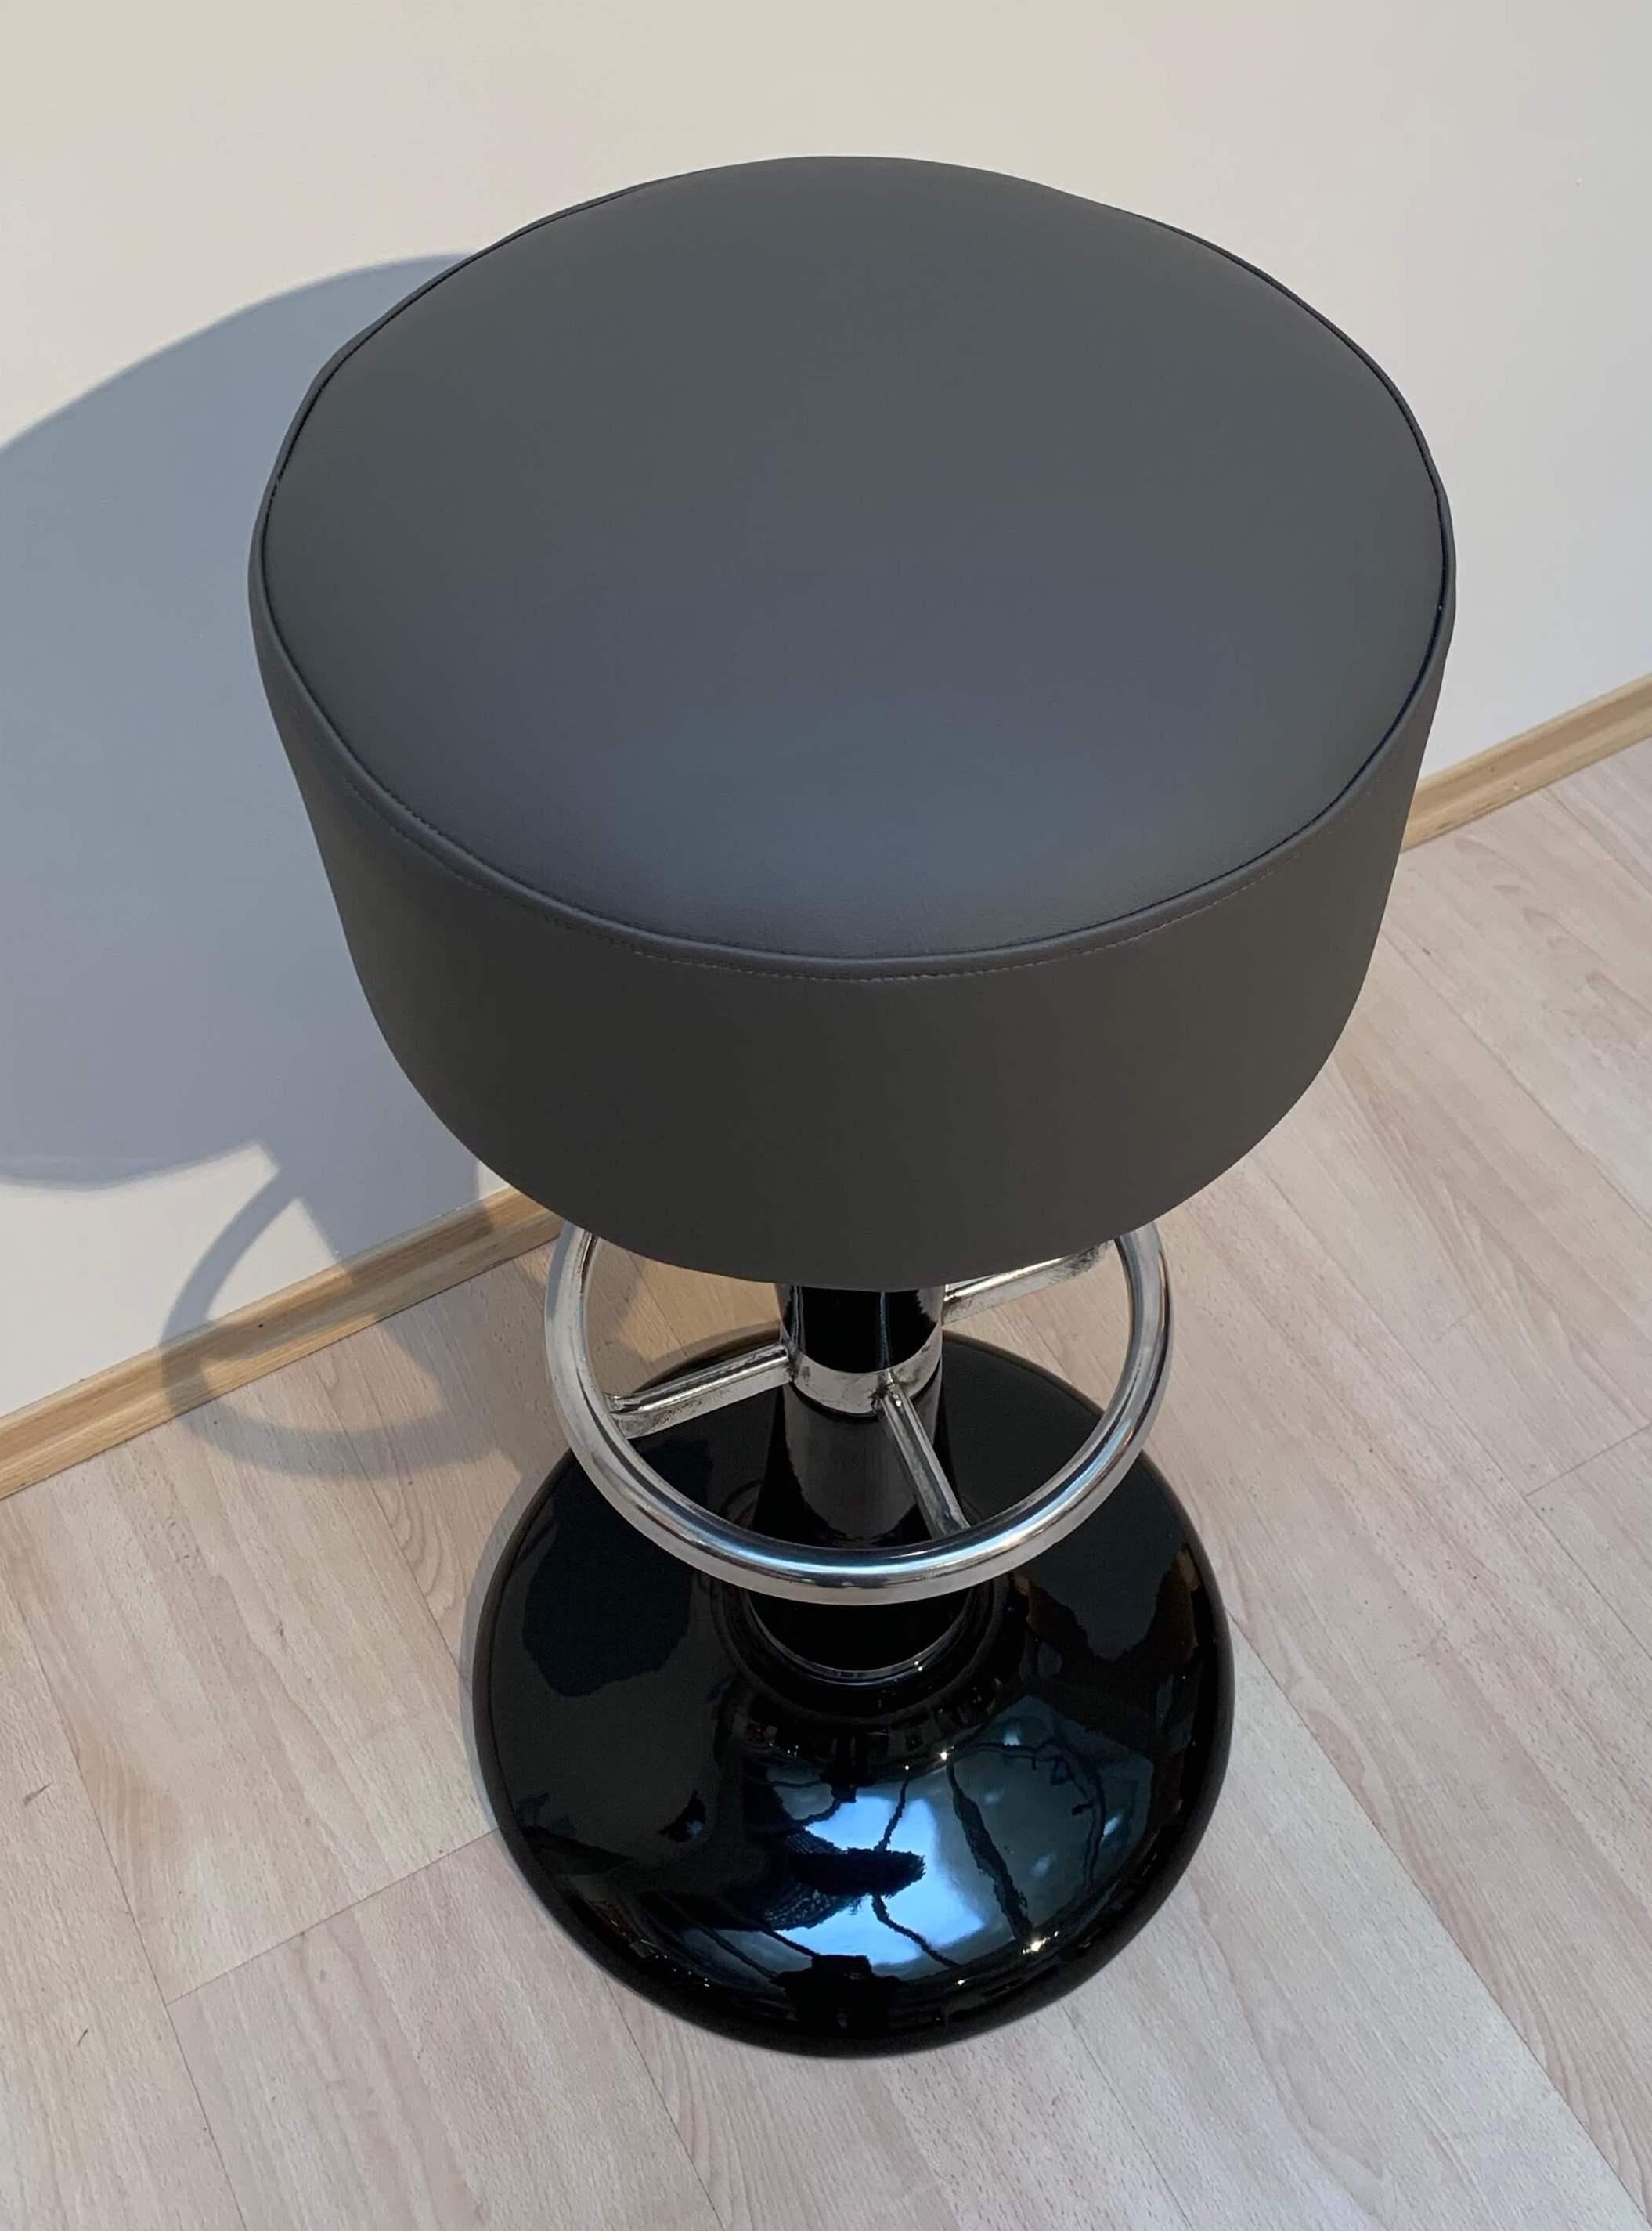 Metal Barstools, Black Lacquer, Chrome, Grey Leather, France, 1950s For Sale 1